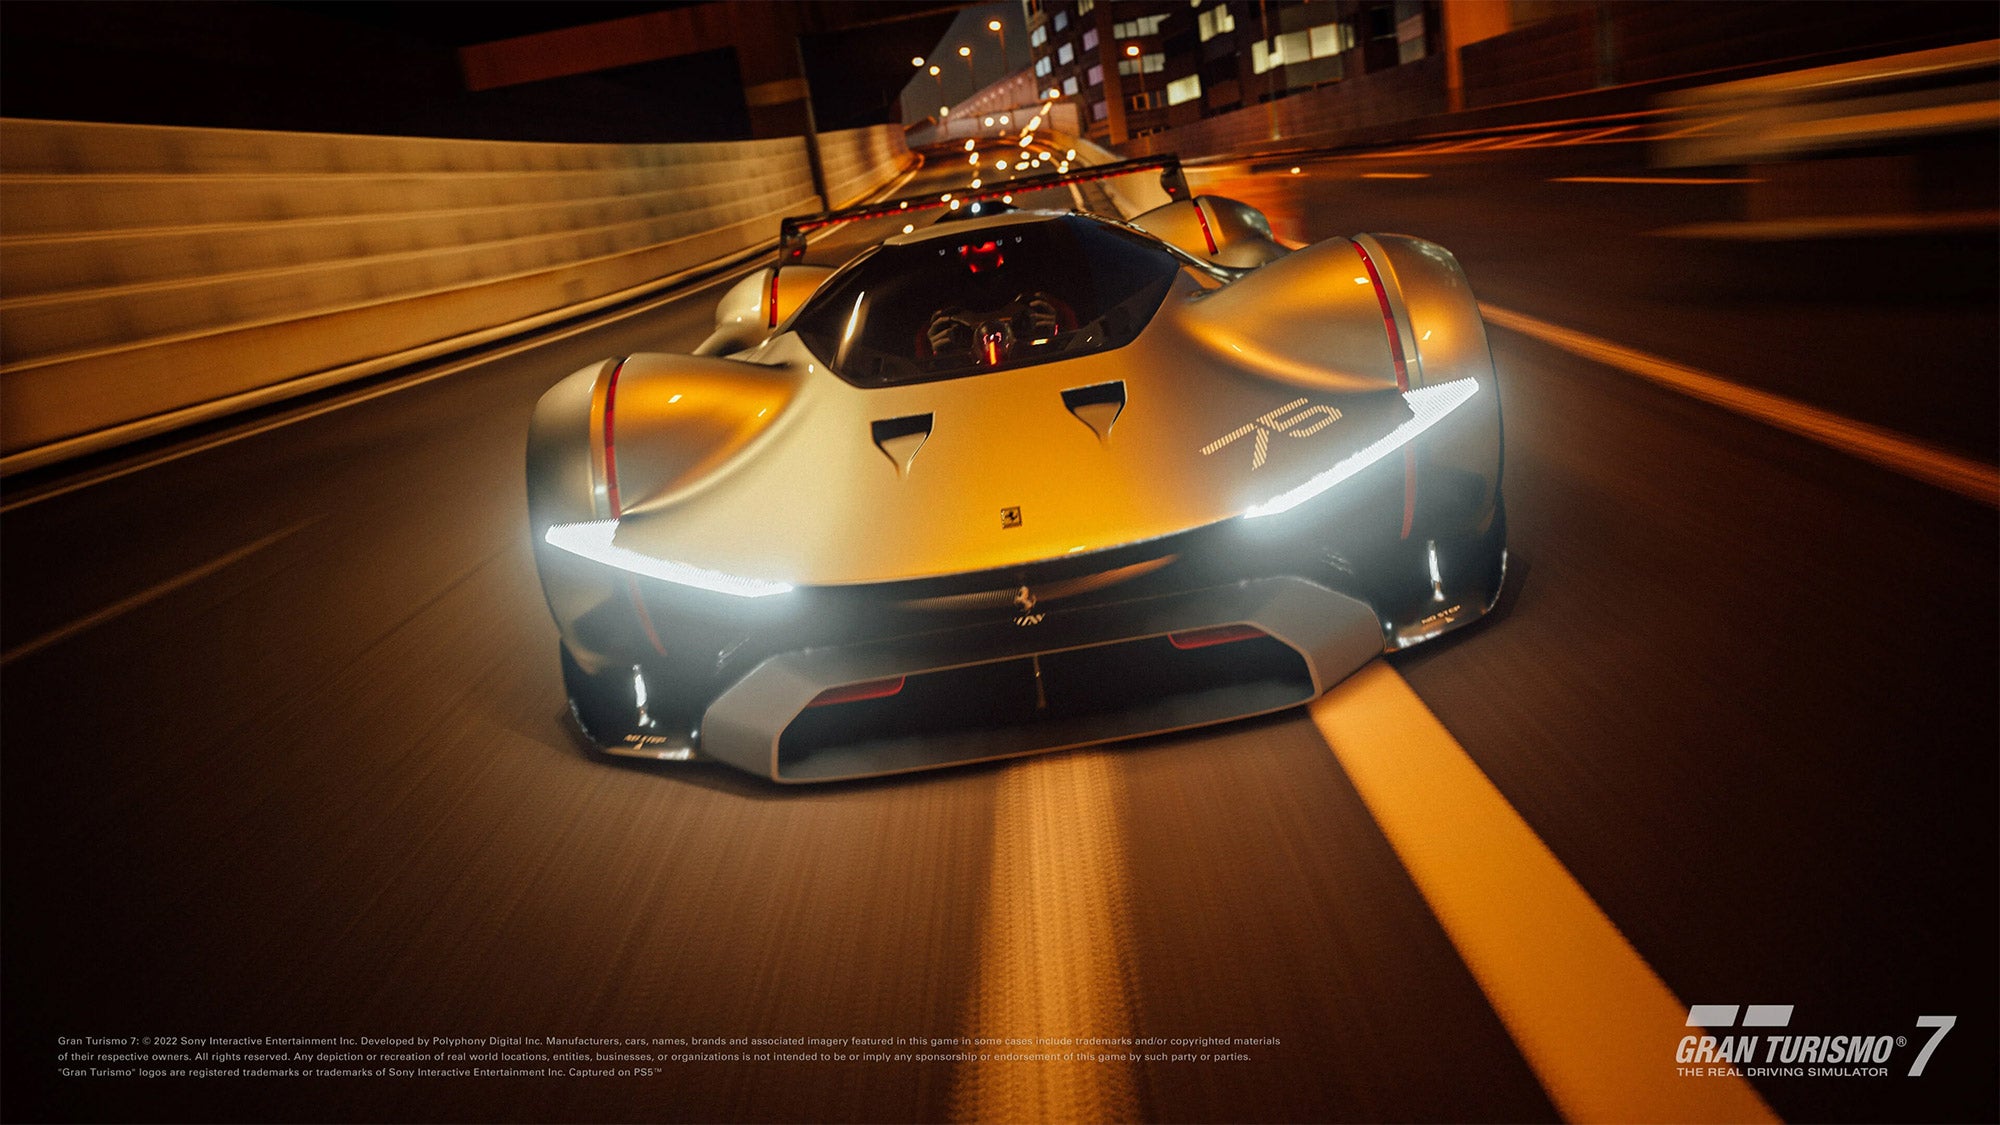 Ferrari’s Vision Gran Turismo Is What its Le Mans Hypercar Wishes it Could Be